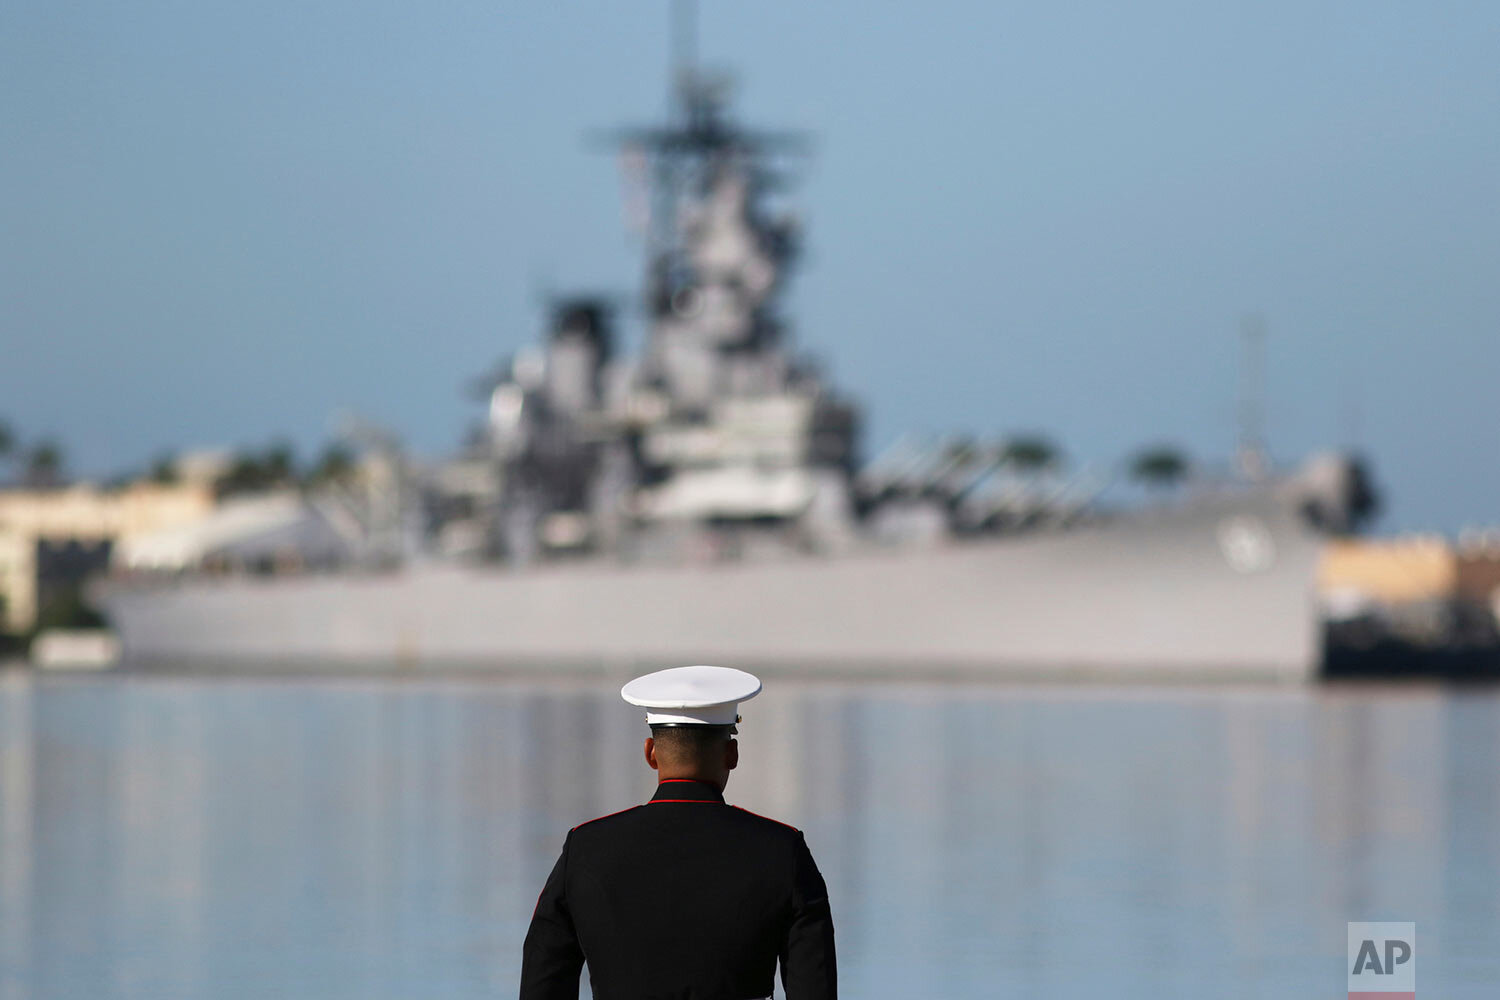  A U.S. Marine stands in front of the USS Missouri during a ceremony to mark the 78th anniversary of the Japanese attack on Pearl Harbor, Saturday, Dec. 7, 2019 at Pearl Harbor, Hawaii. Survivors and members of the public gathered to remember those k